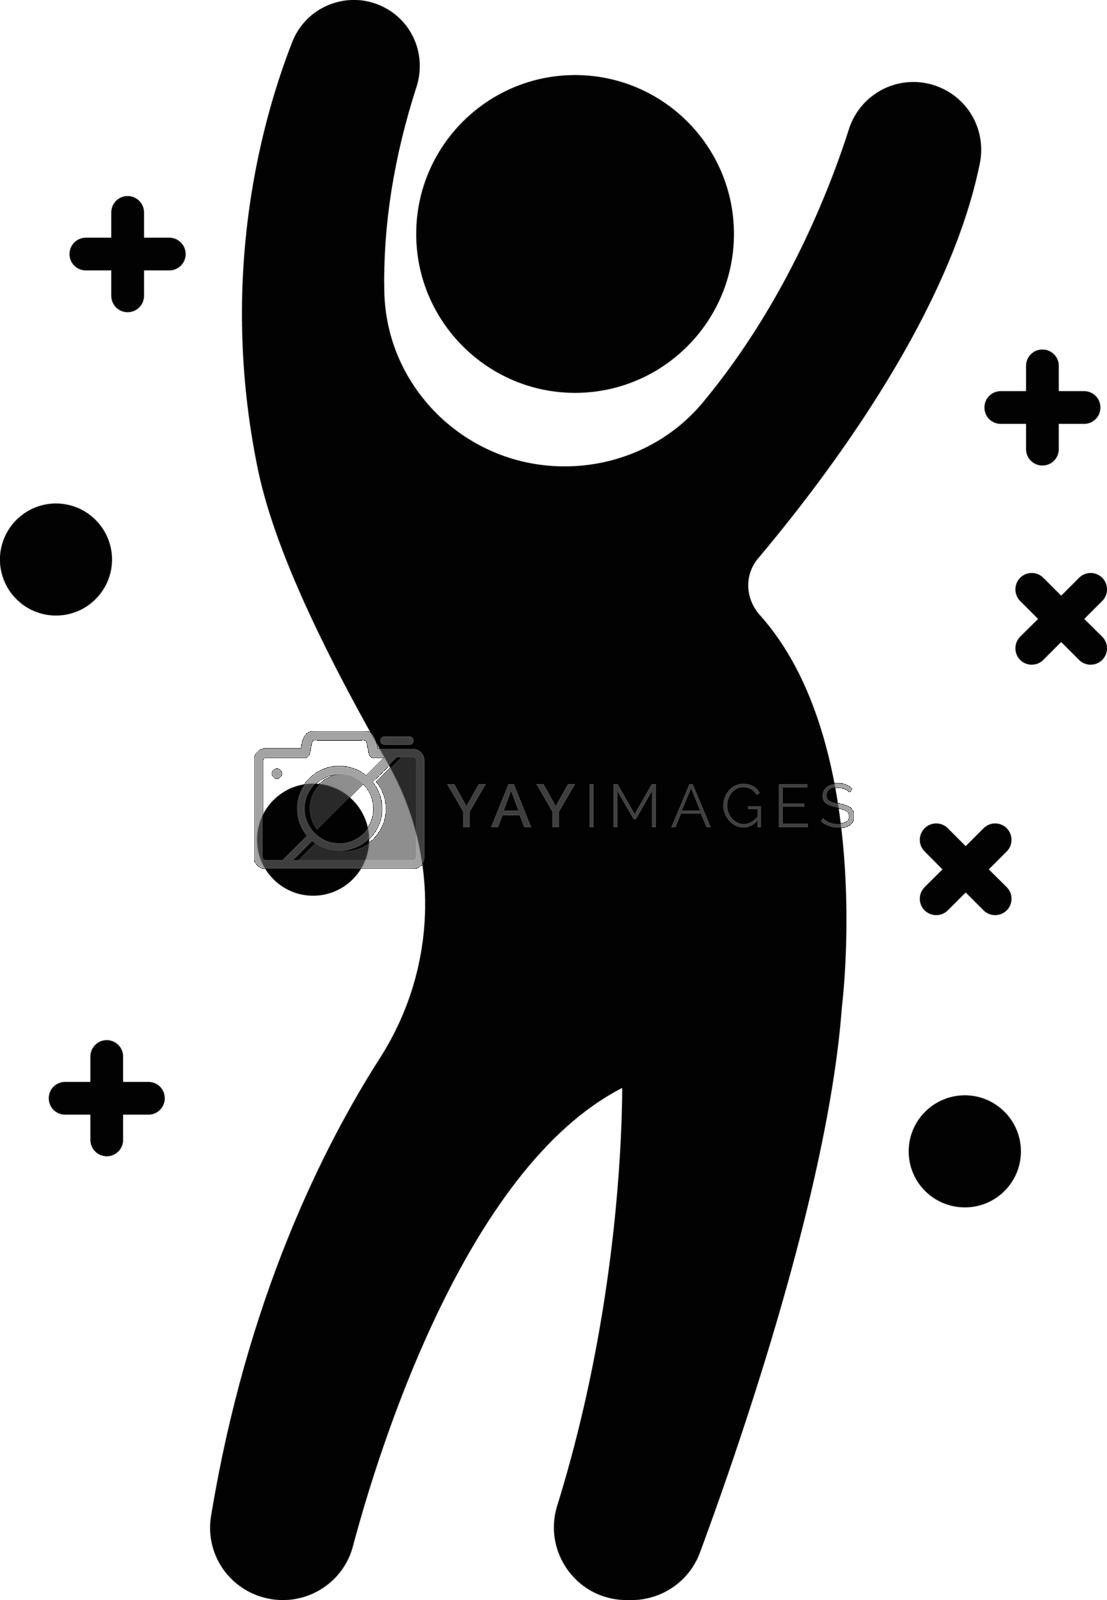 Royalty free image of dancing by vectorstall